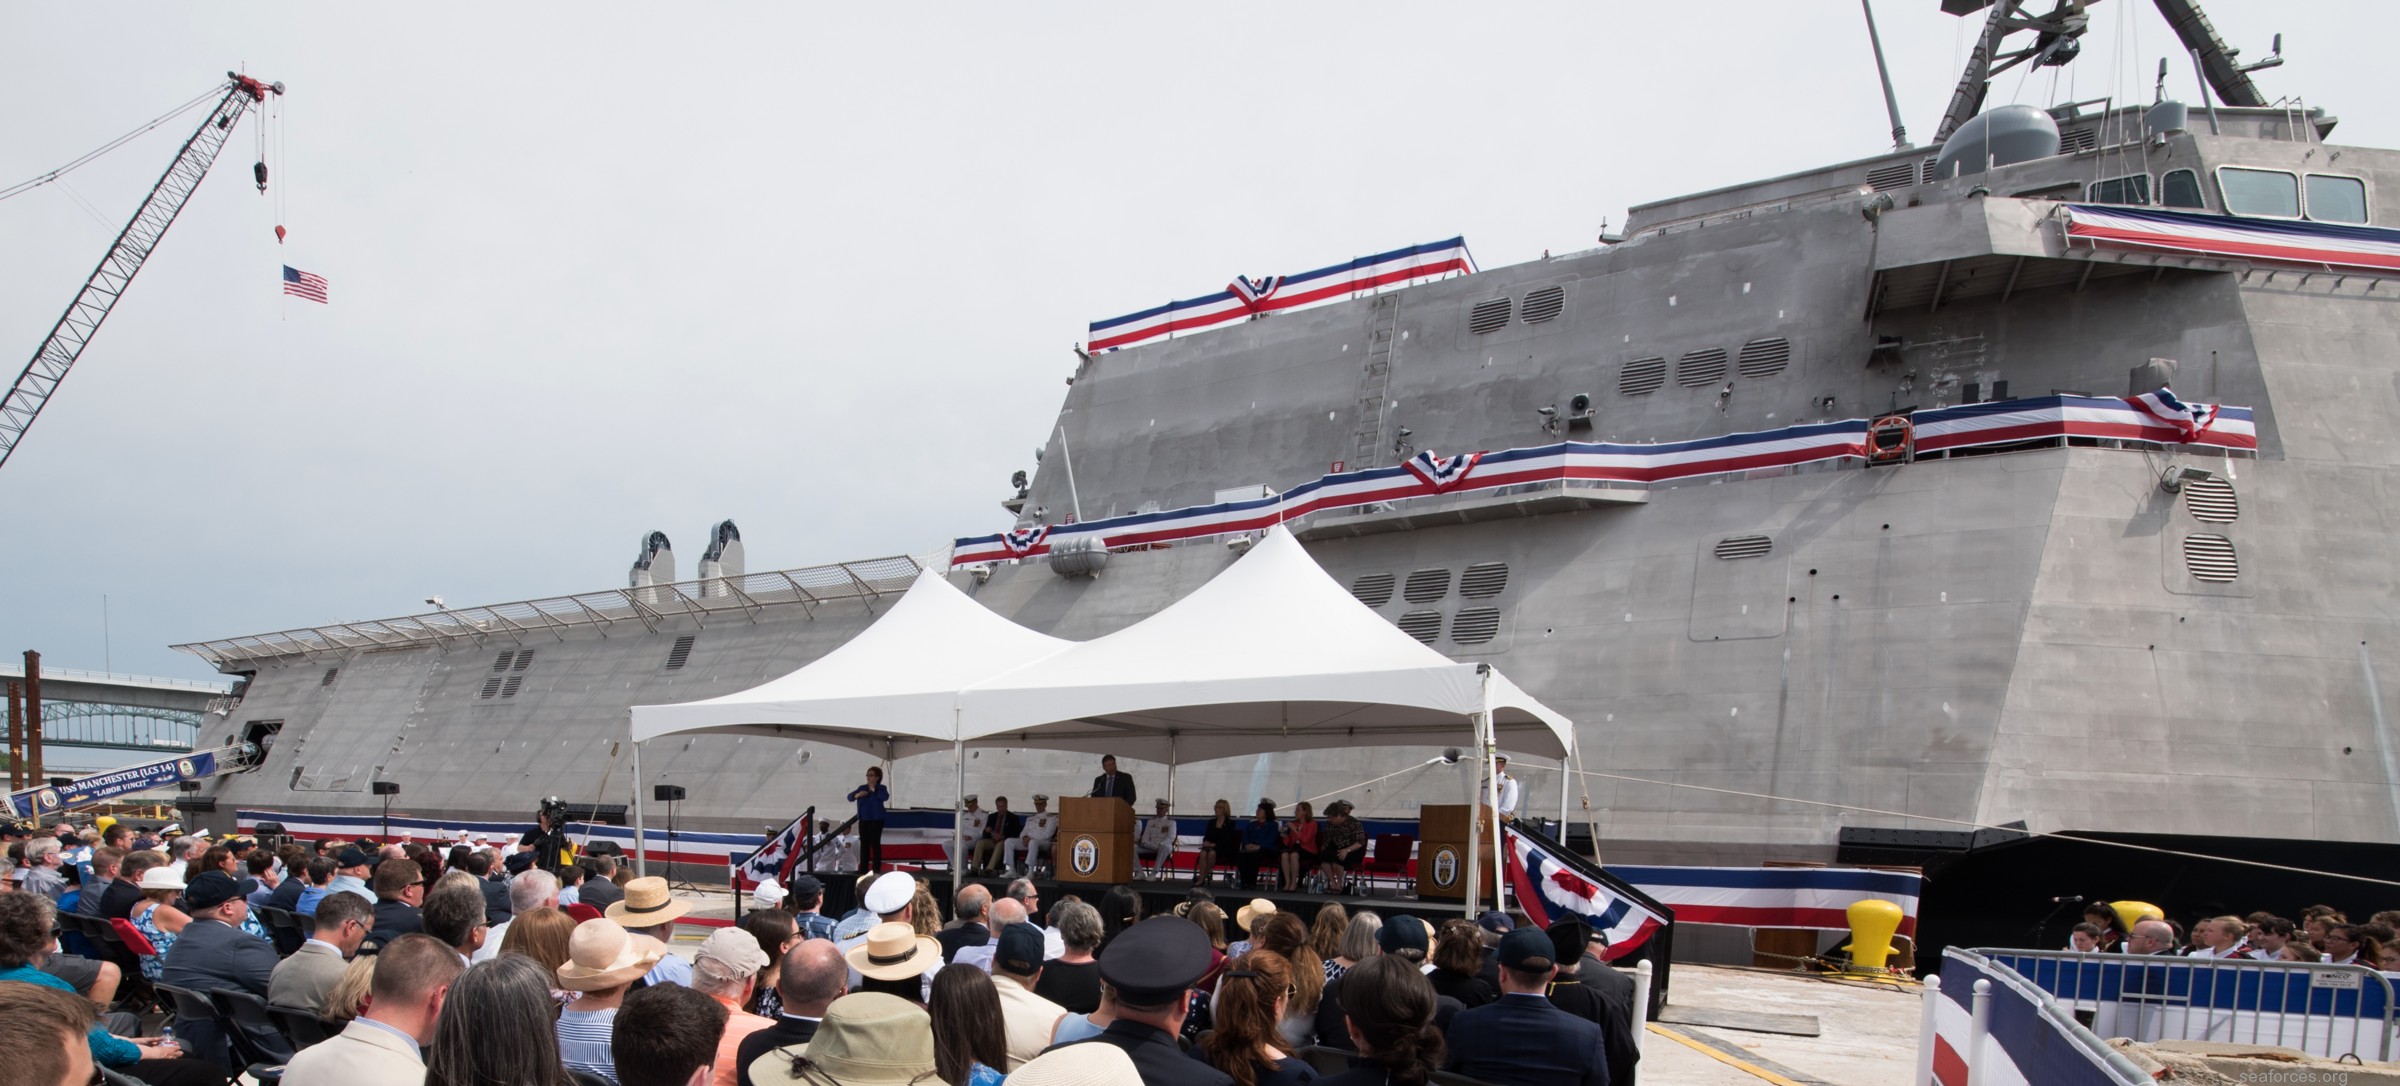 lcs-14 uss manchester littoral combat ship independence class us navy 03 commissioning portsmouth new hampshire